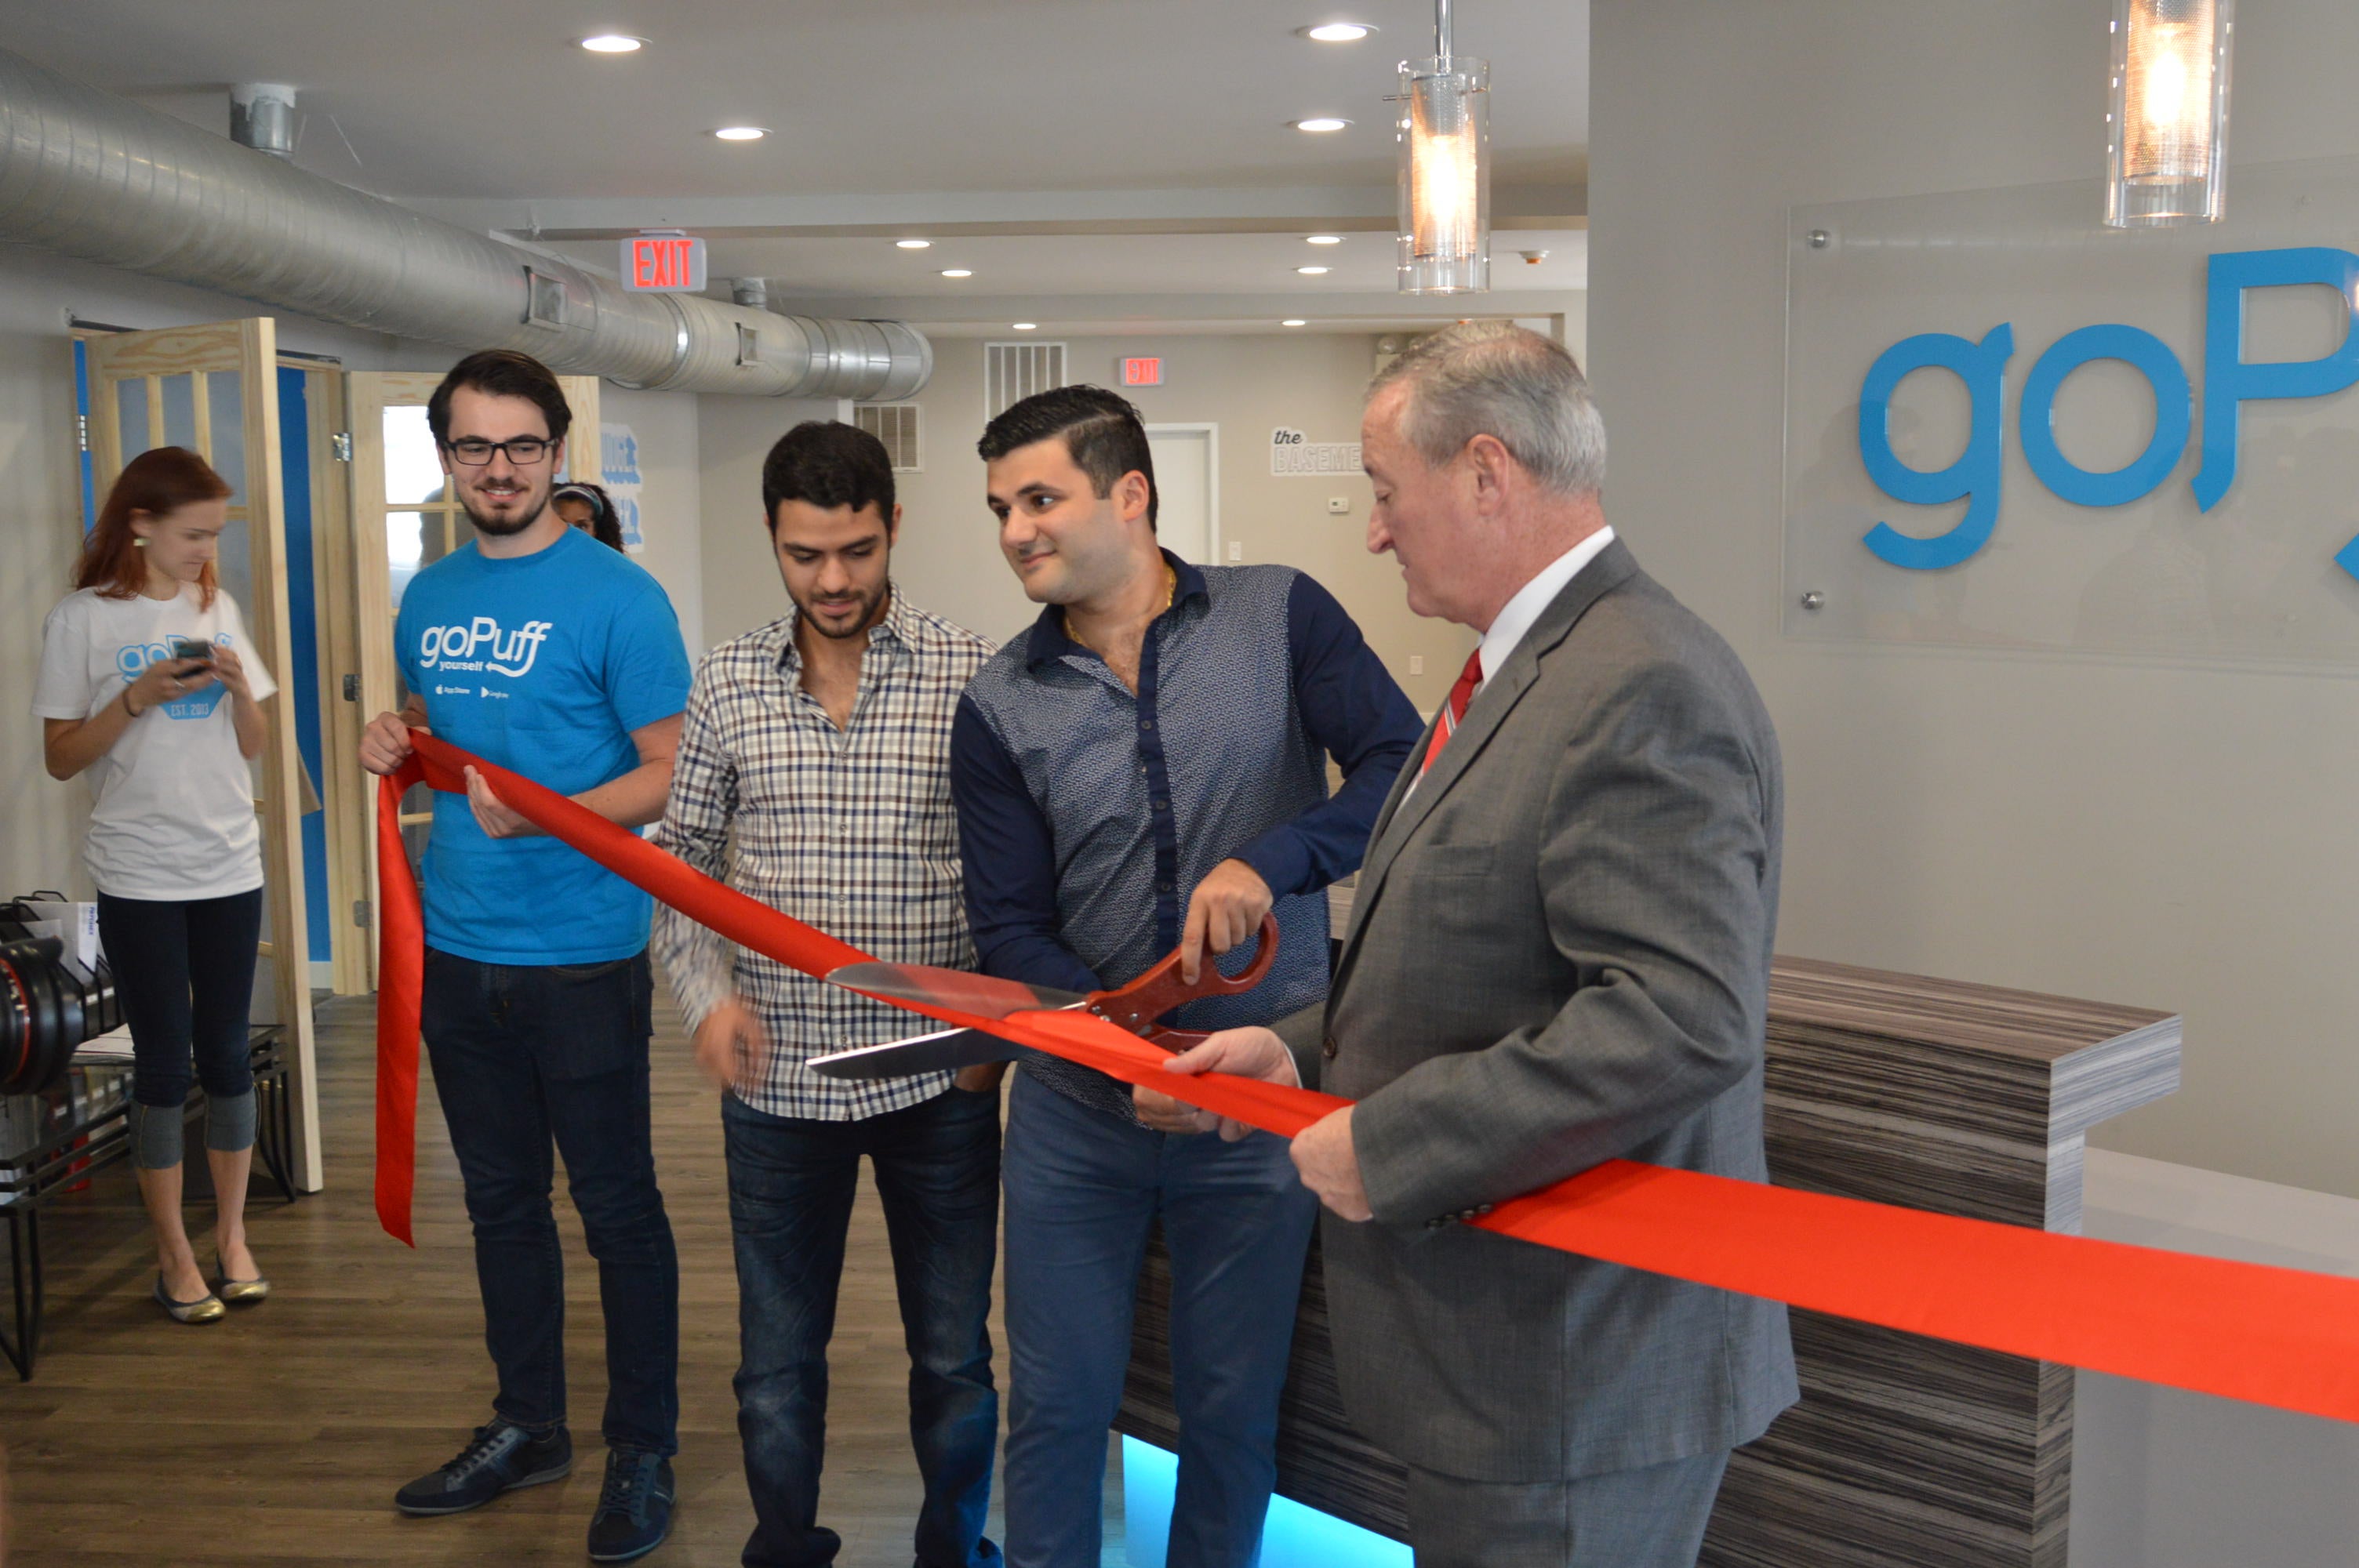  Mayor Jim Kenney helps with ribbon cutting at Go Puff Headquarters (Tom MacDonald/WHYY) 